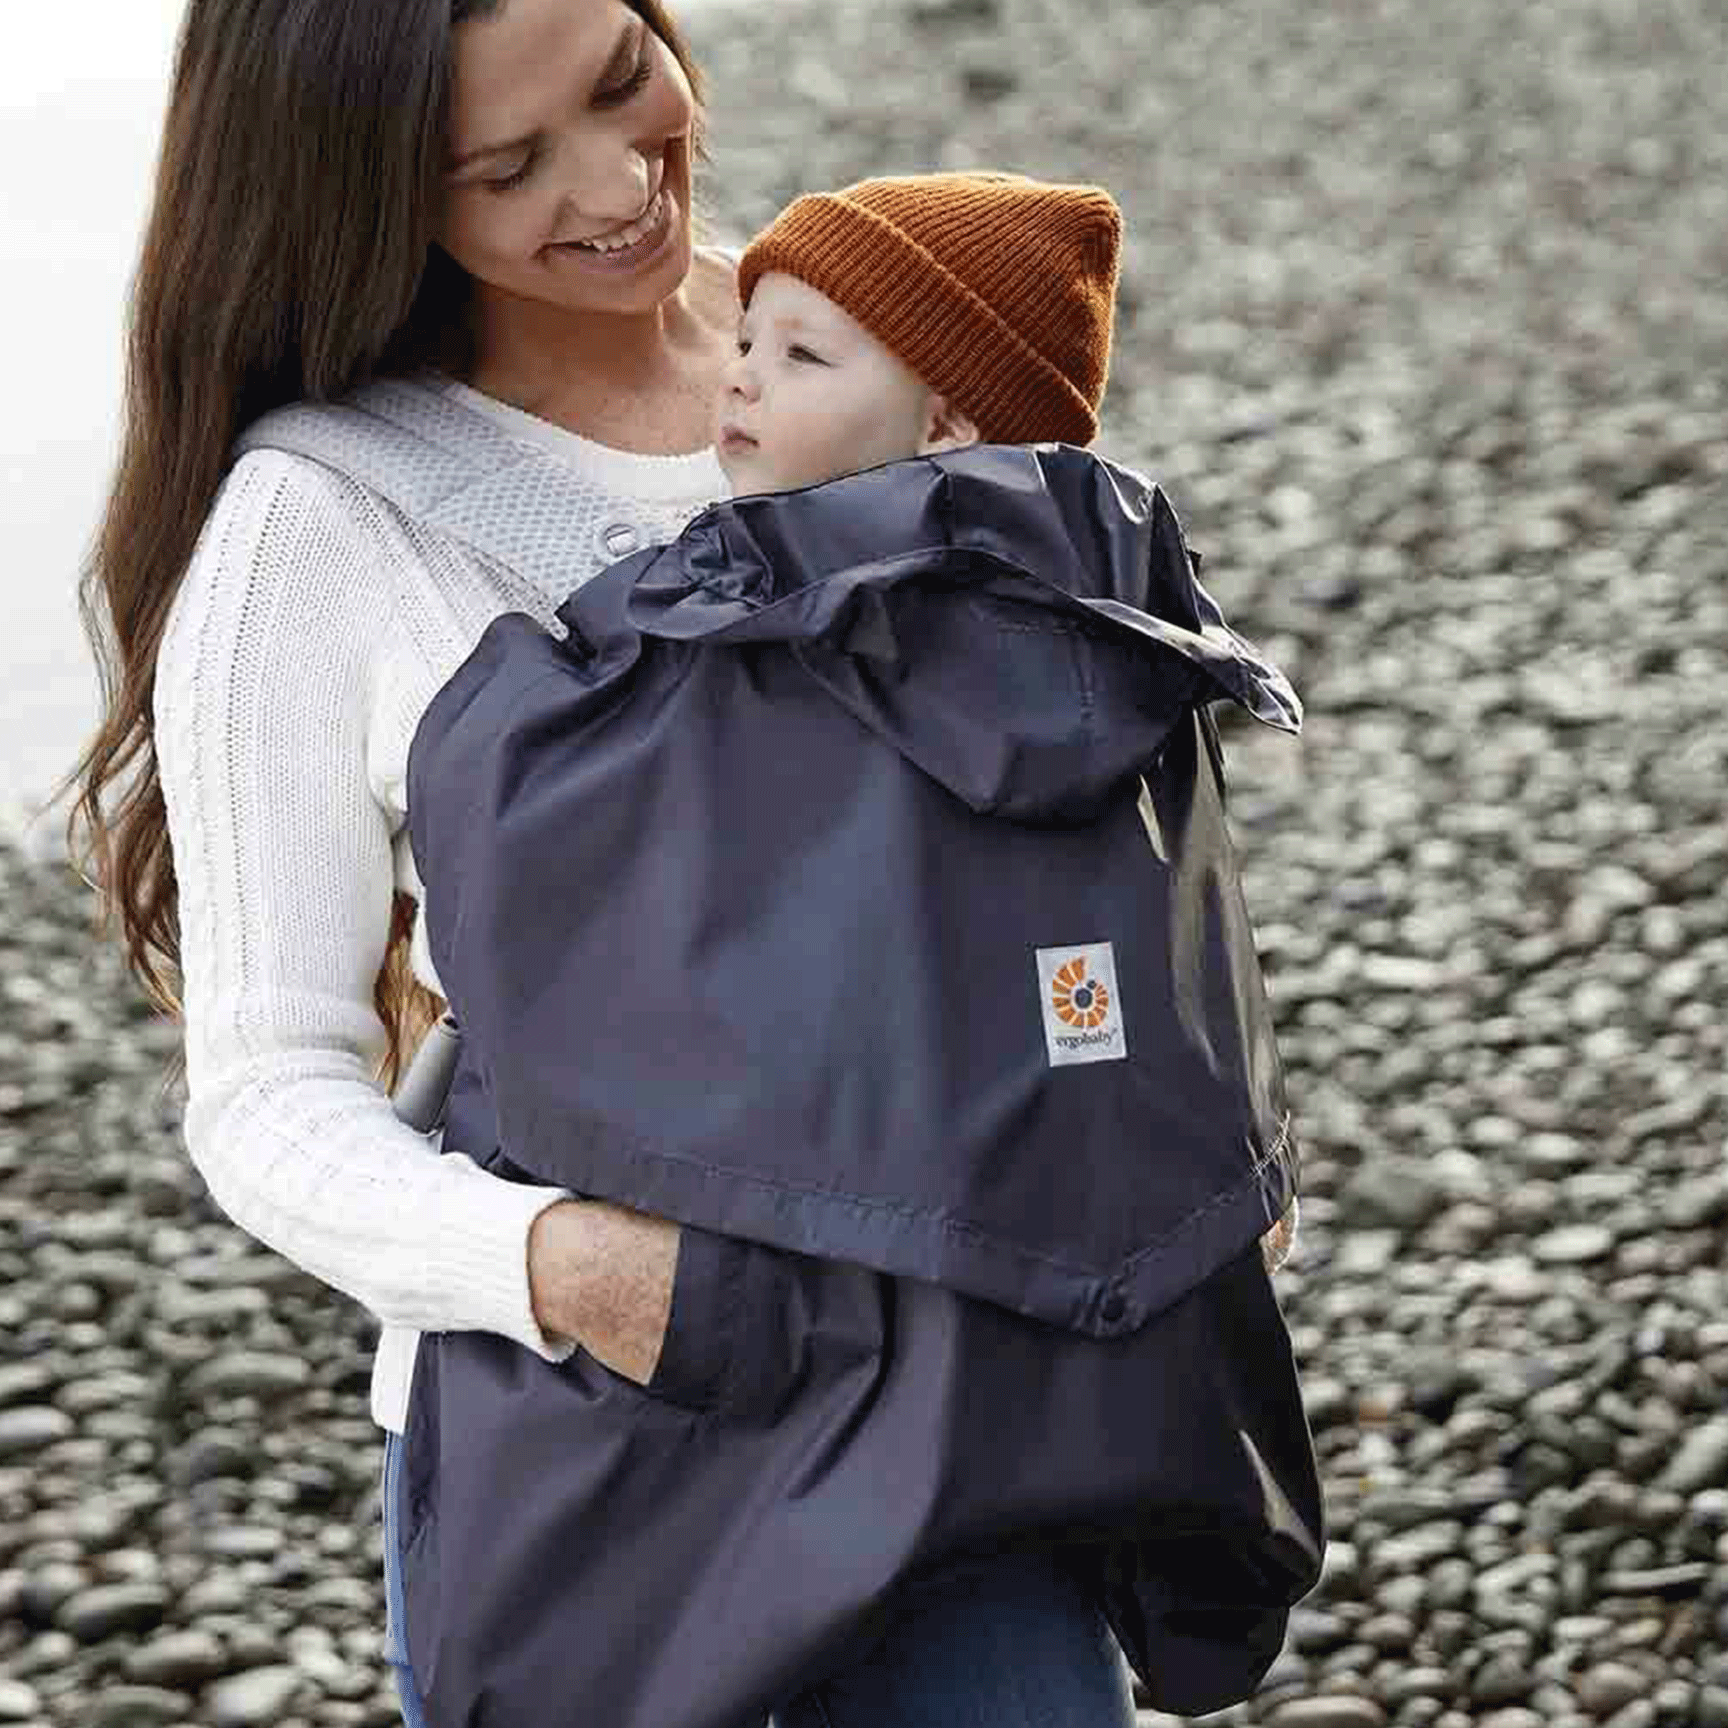 Ergobaby Ergo Carrier Rain and Wind Cover in Charcoal Baby Carriers WCRWCHAR 191653006409